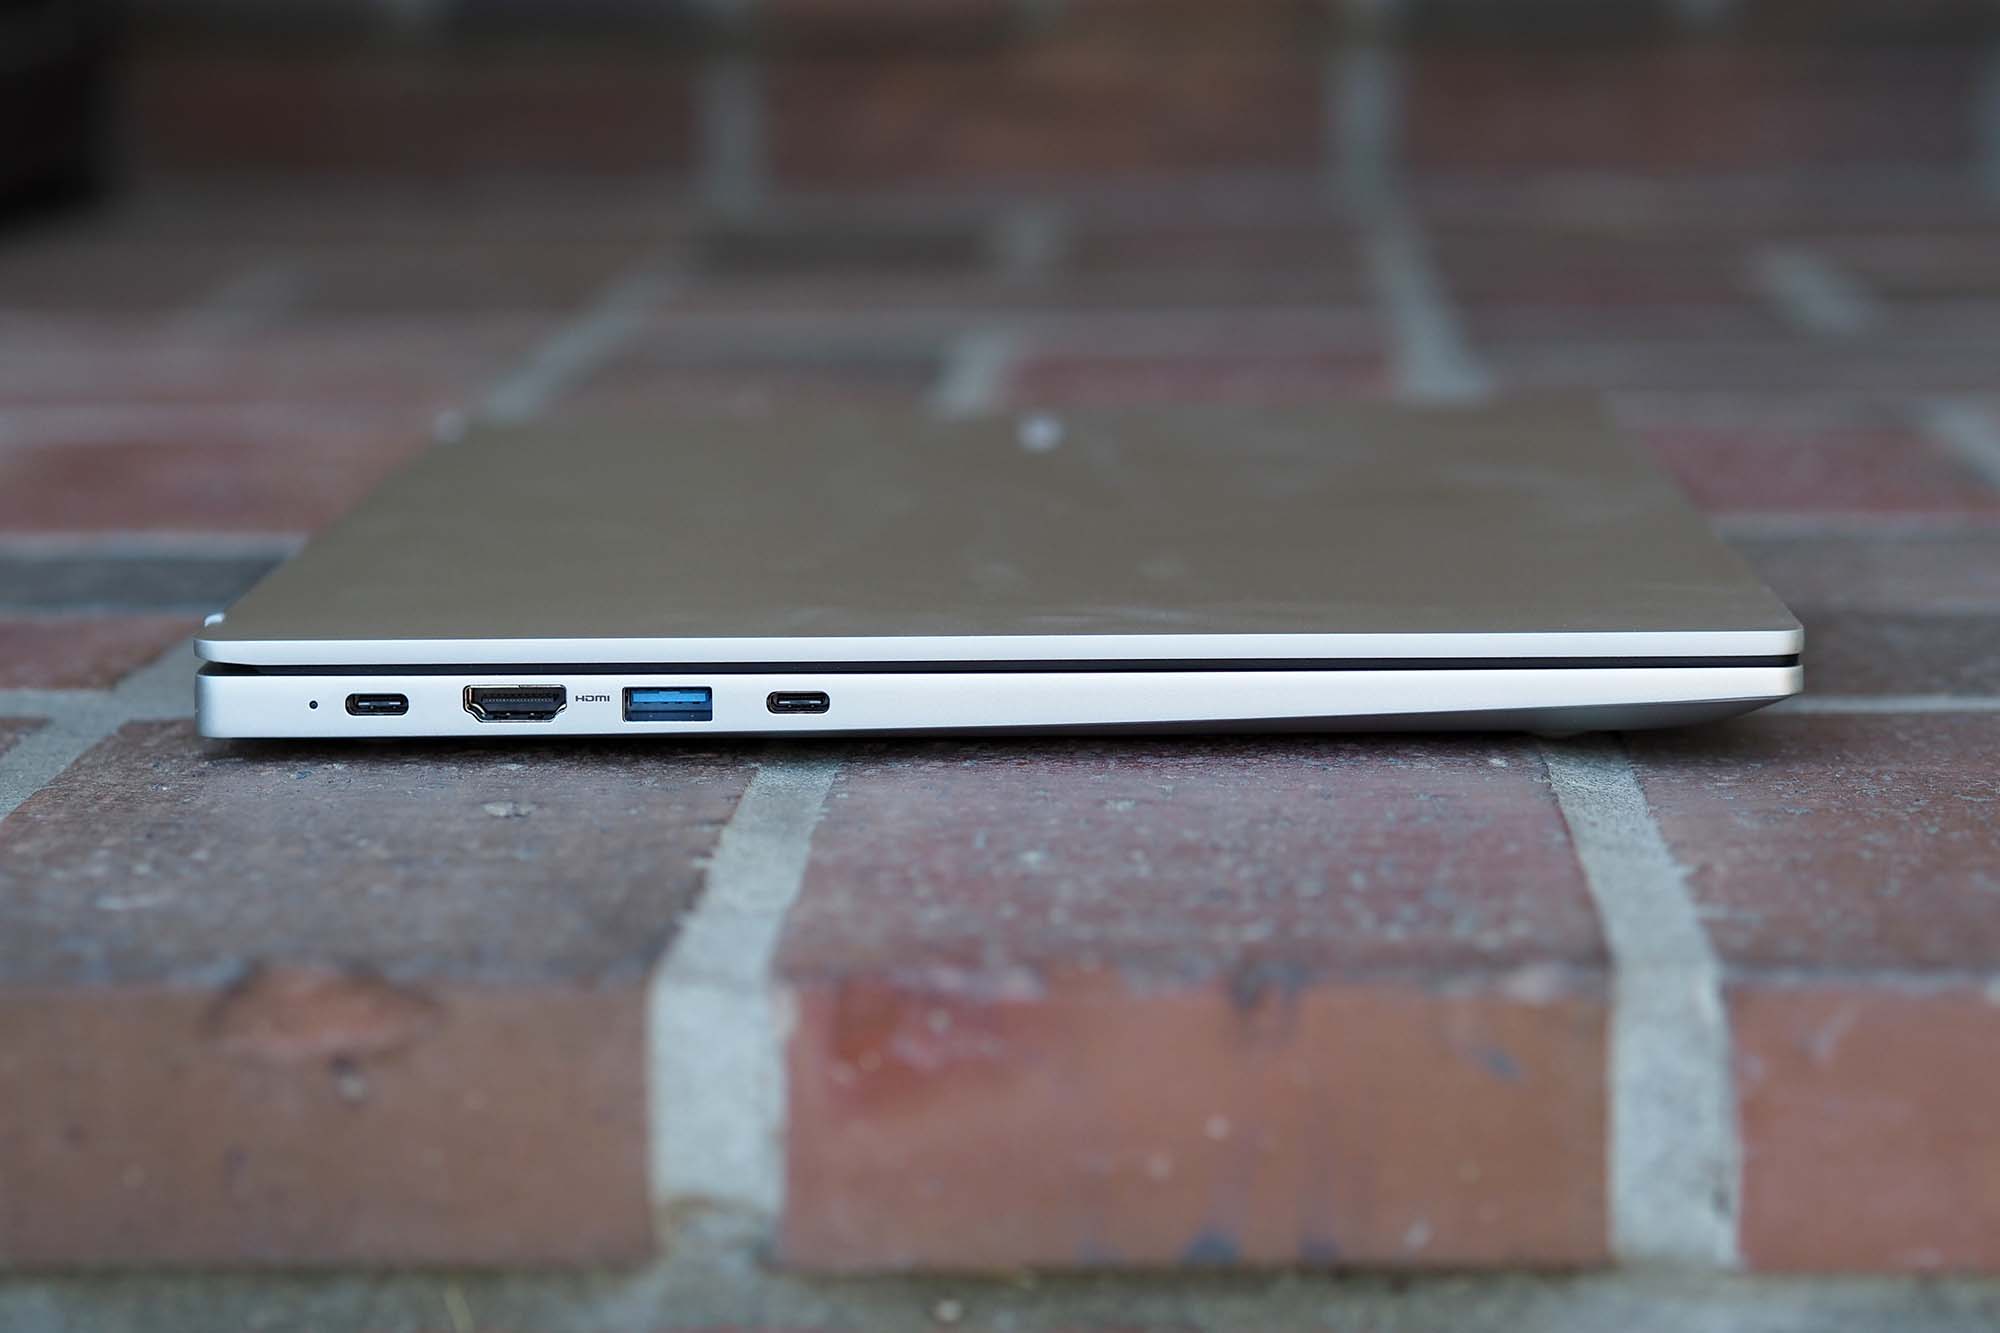 Two USB-C ports, a full-size HDMI port, and a USB-A port line the left-hand side of the Samsung Galaxy Book for business.